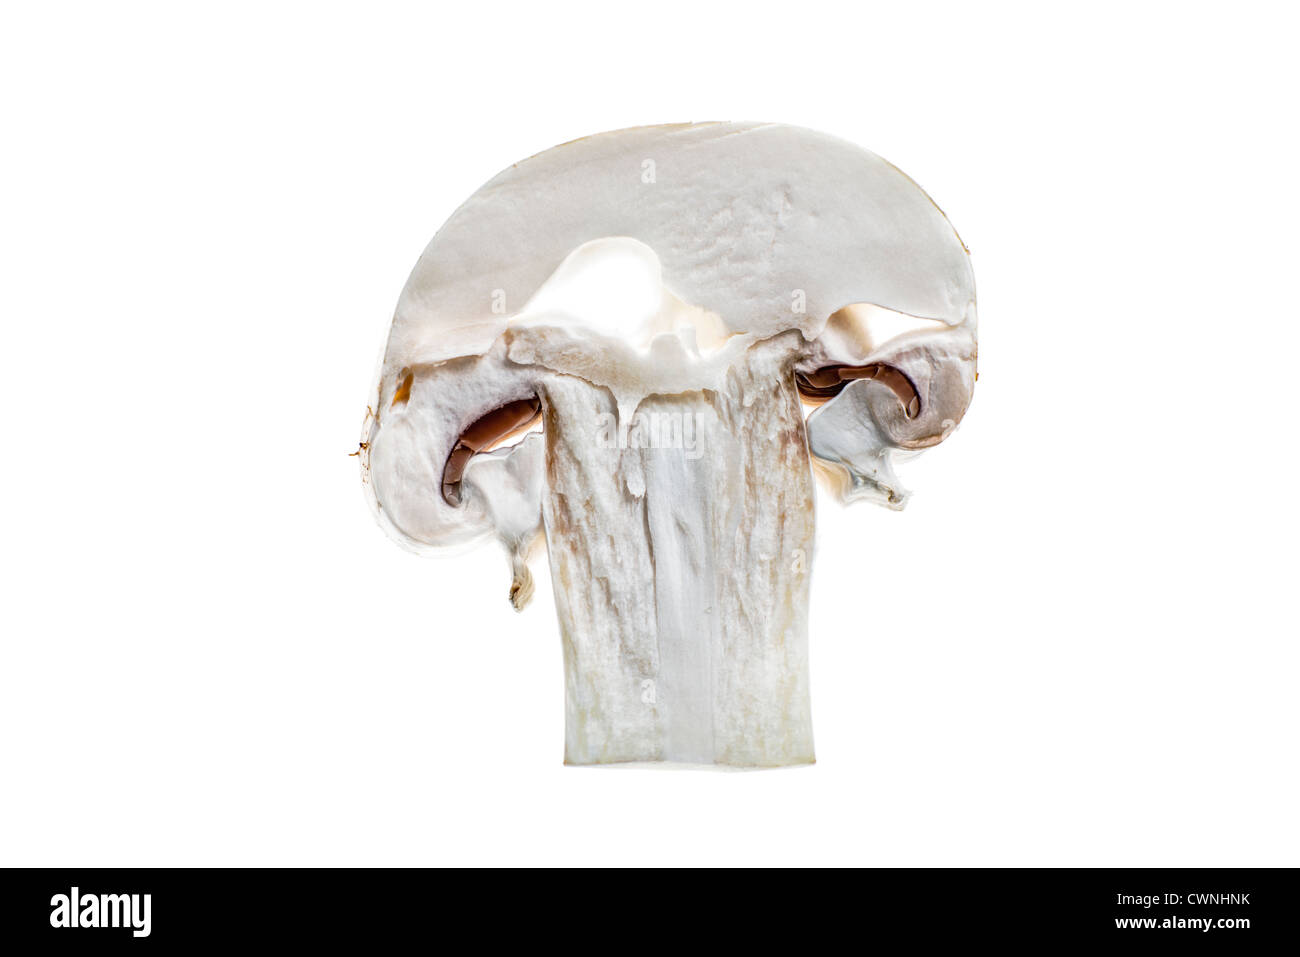 Slice of a button Mushroom, Champignon (Agaricus), isolated on 100% white background Stock Photo